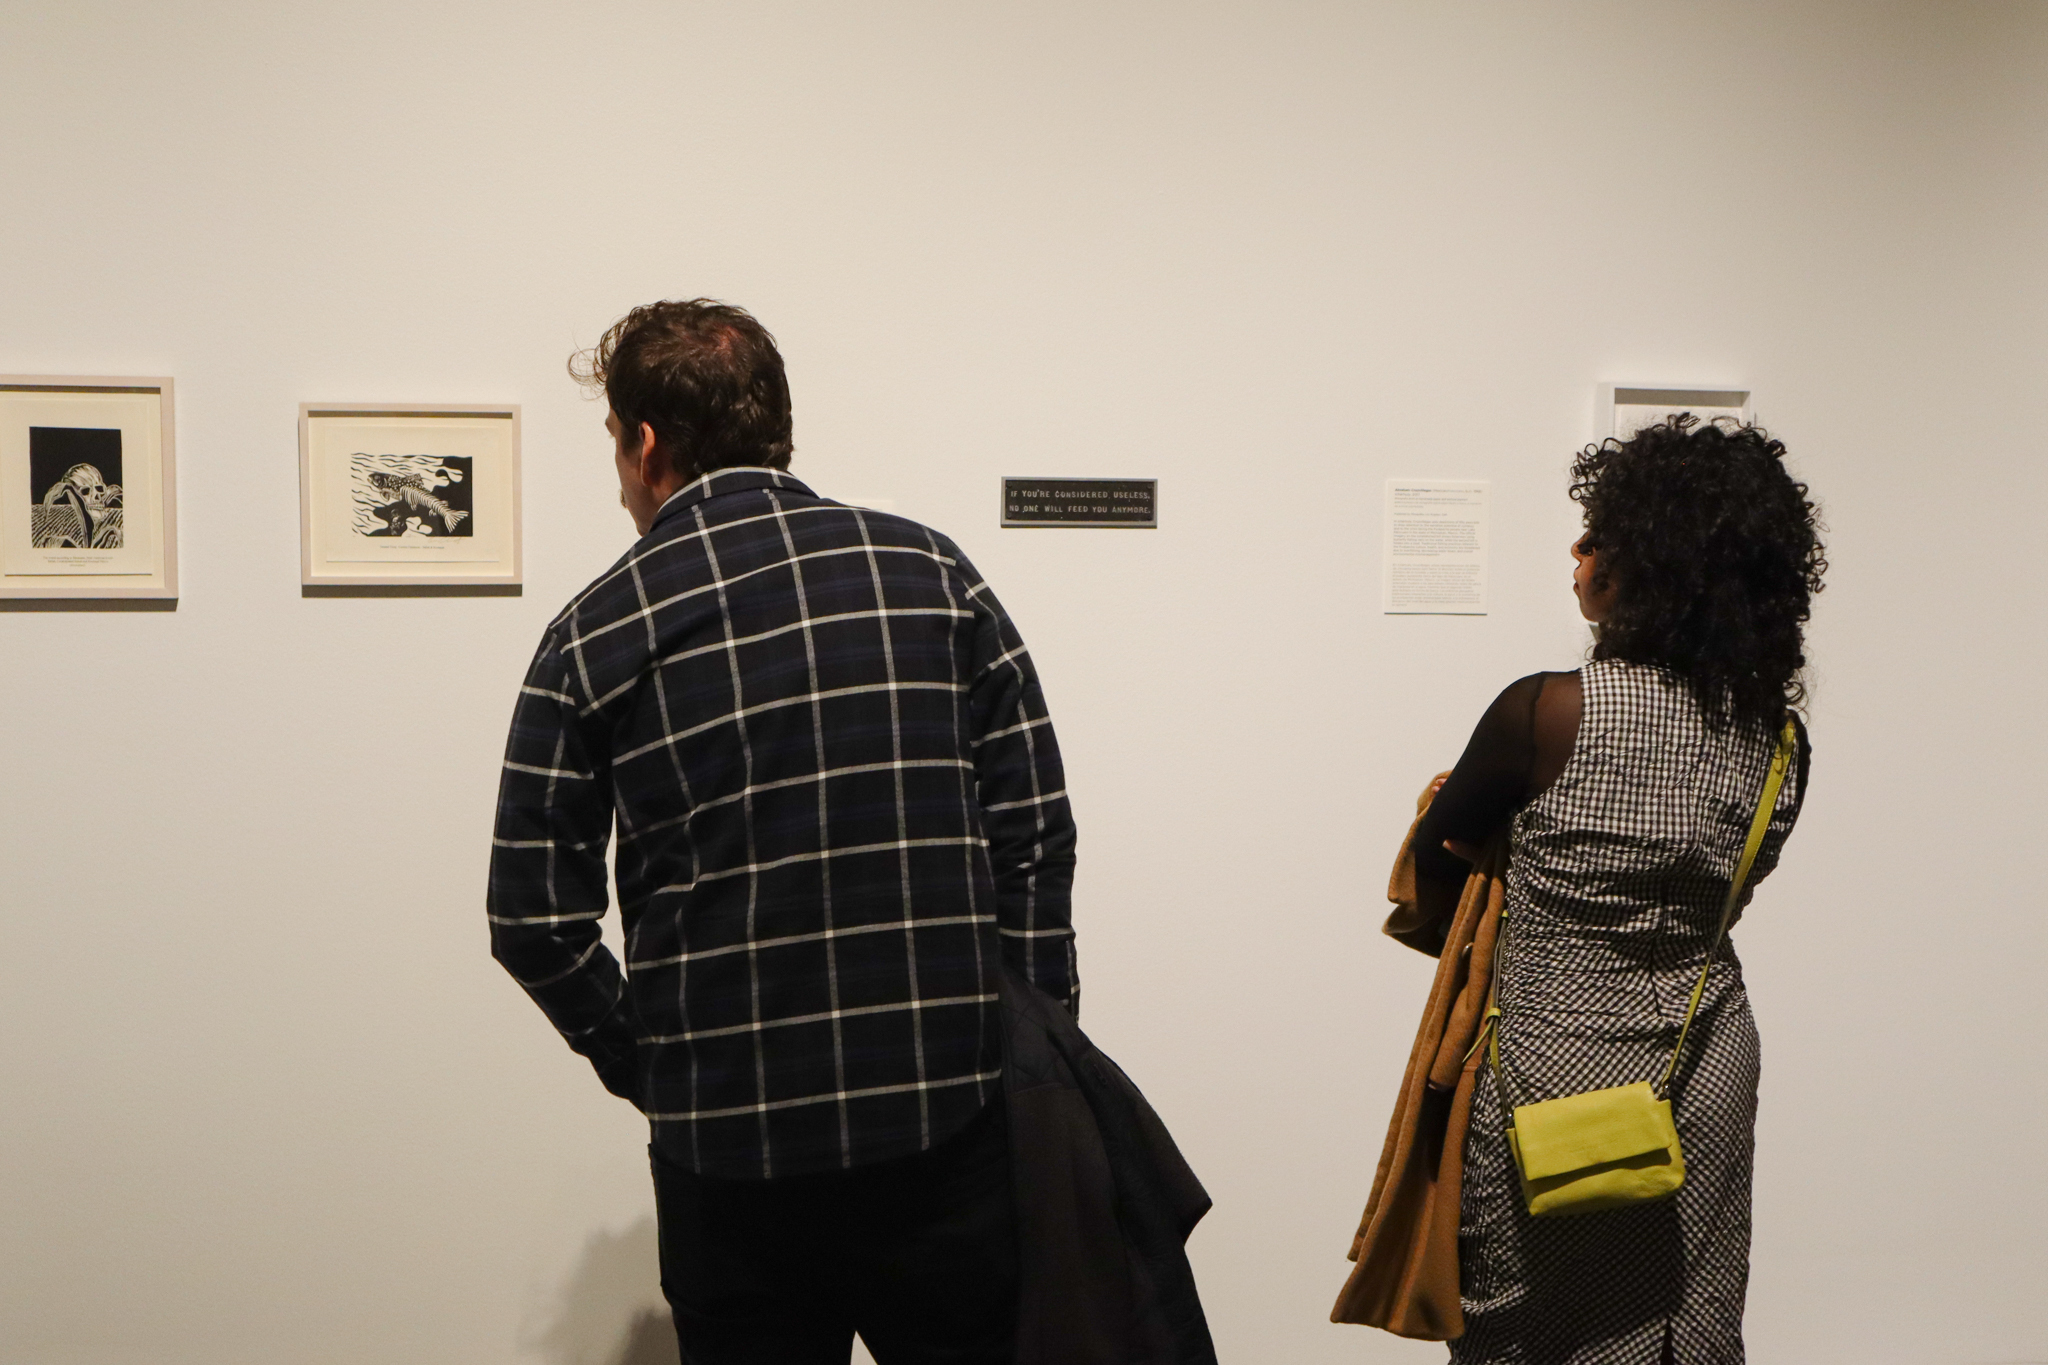 Two people are looking at art hanging on a white wall. There are three visible pieces: two black prints of a corn field with a skull and a salmon swimming, the other a black rectangle plate.